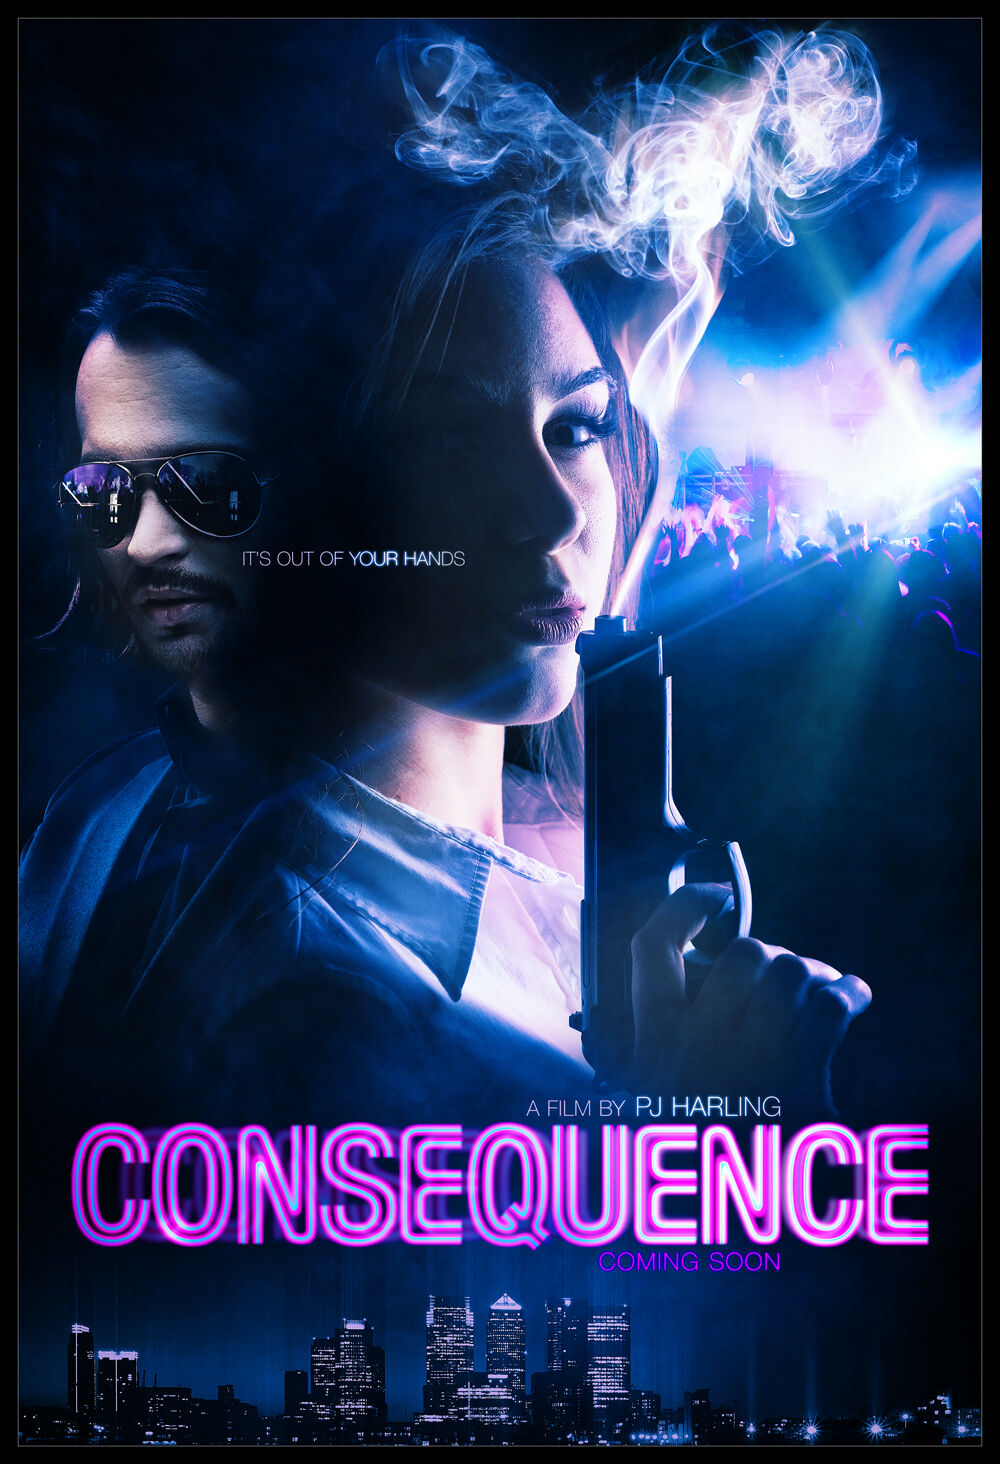 CONSEQUENCE